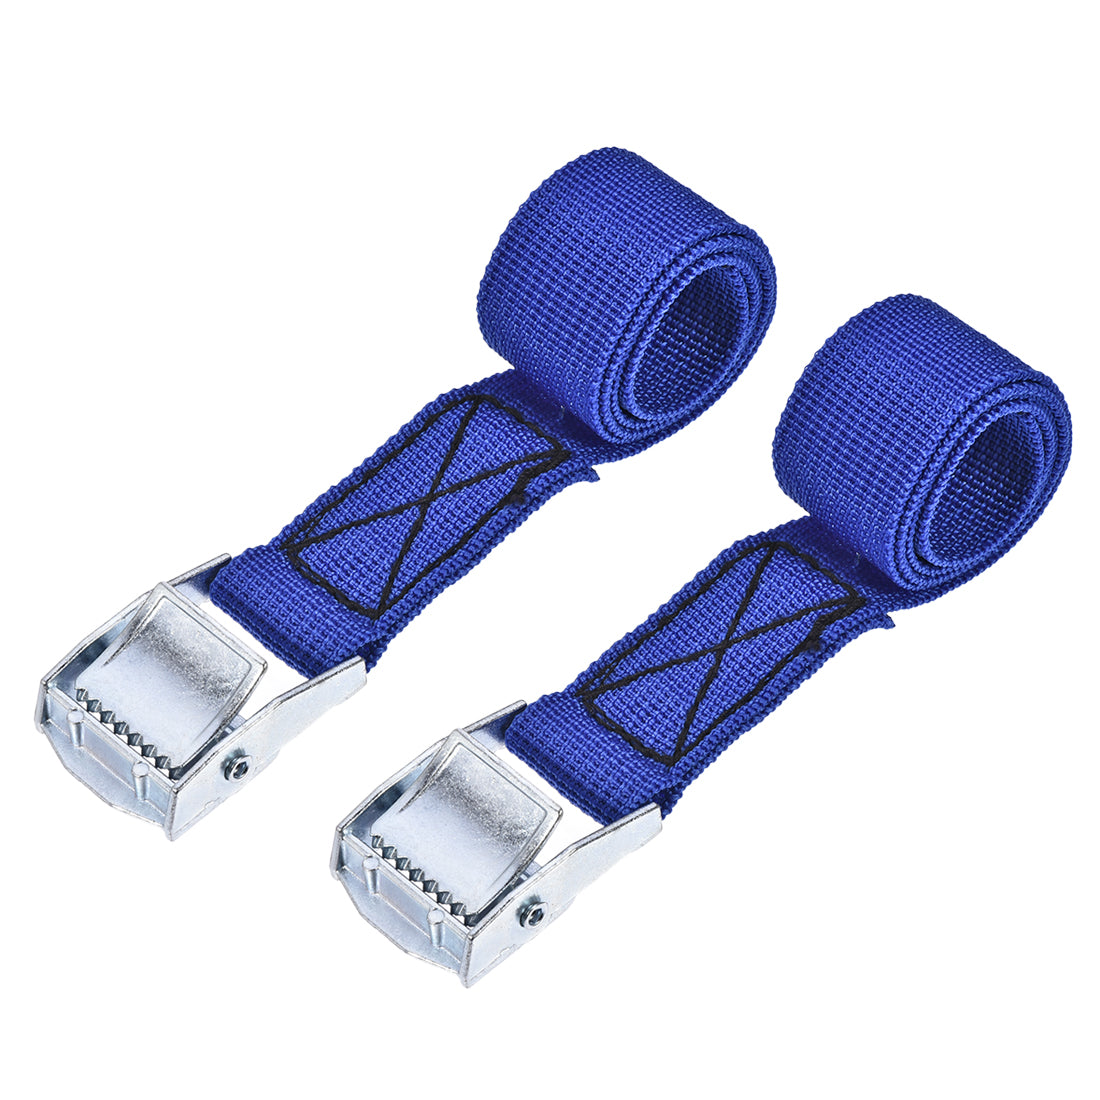 uxcell Uxcell Lashing Strap 0.5M x 25mm Cargo Tie Down Straps Buckle Working Load up to 80kg Blue 2pcs